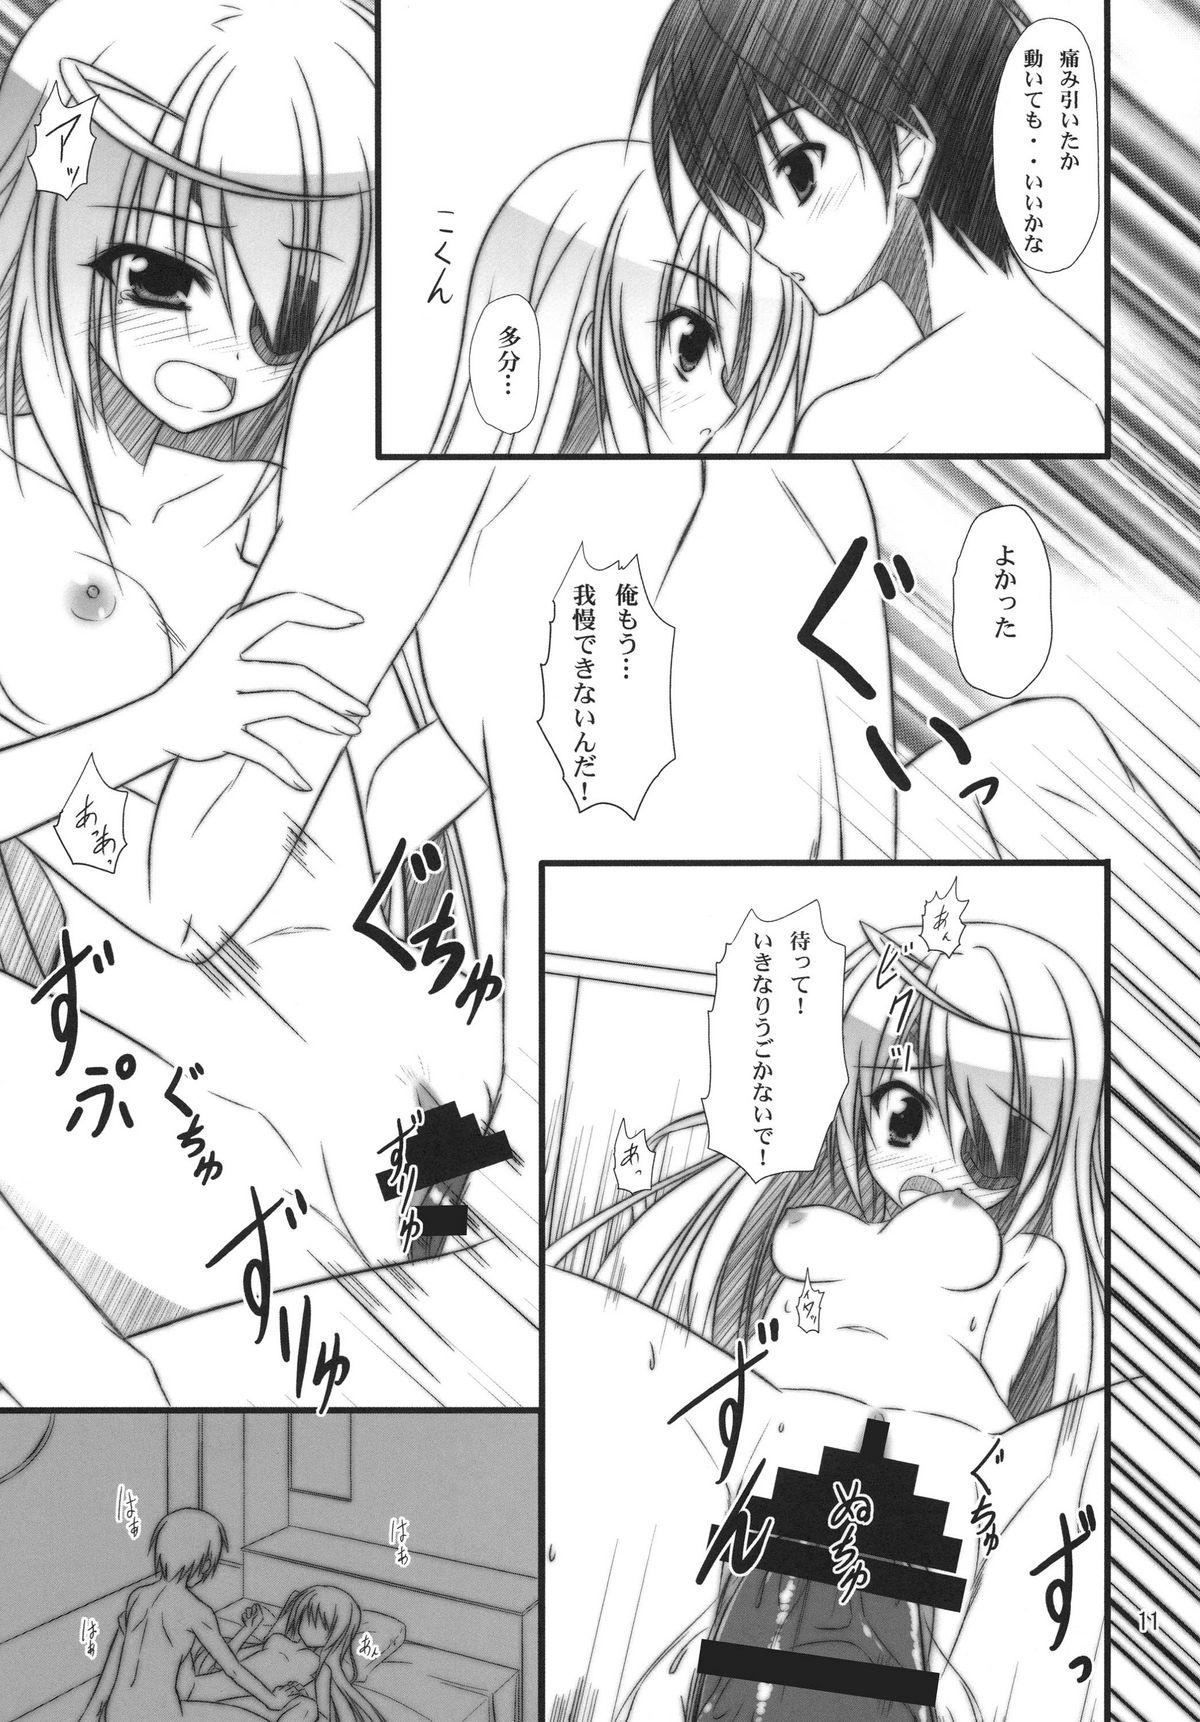 Leaked Bullet hole! - Infinite stratos Blondes - Page 11